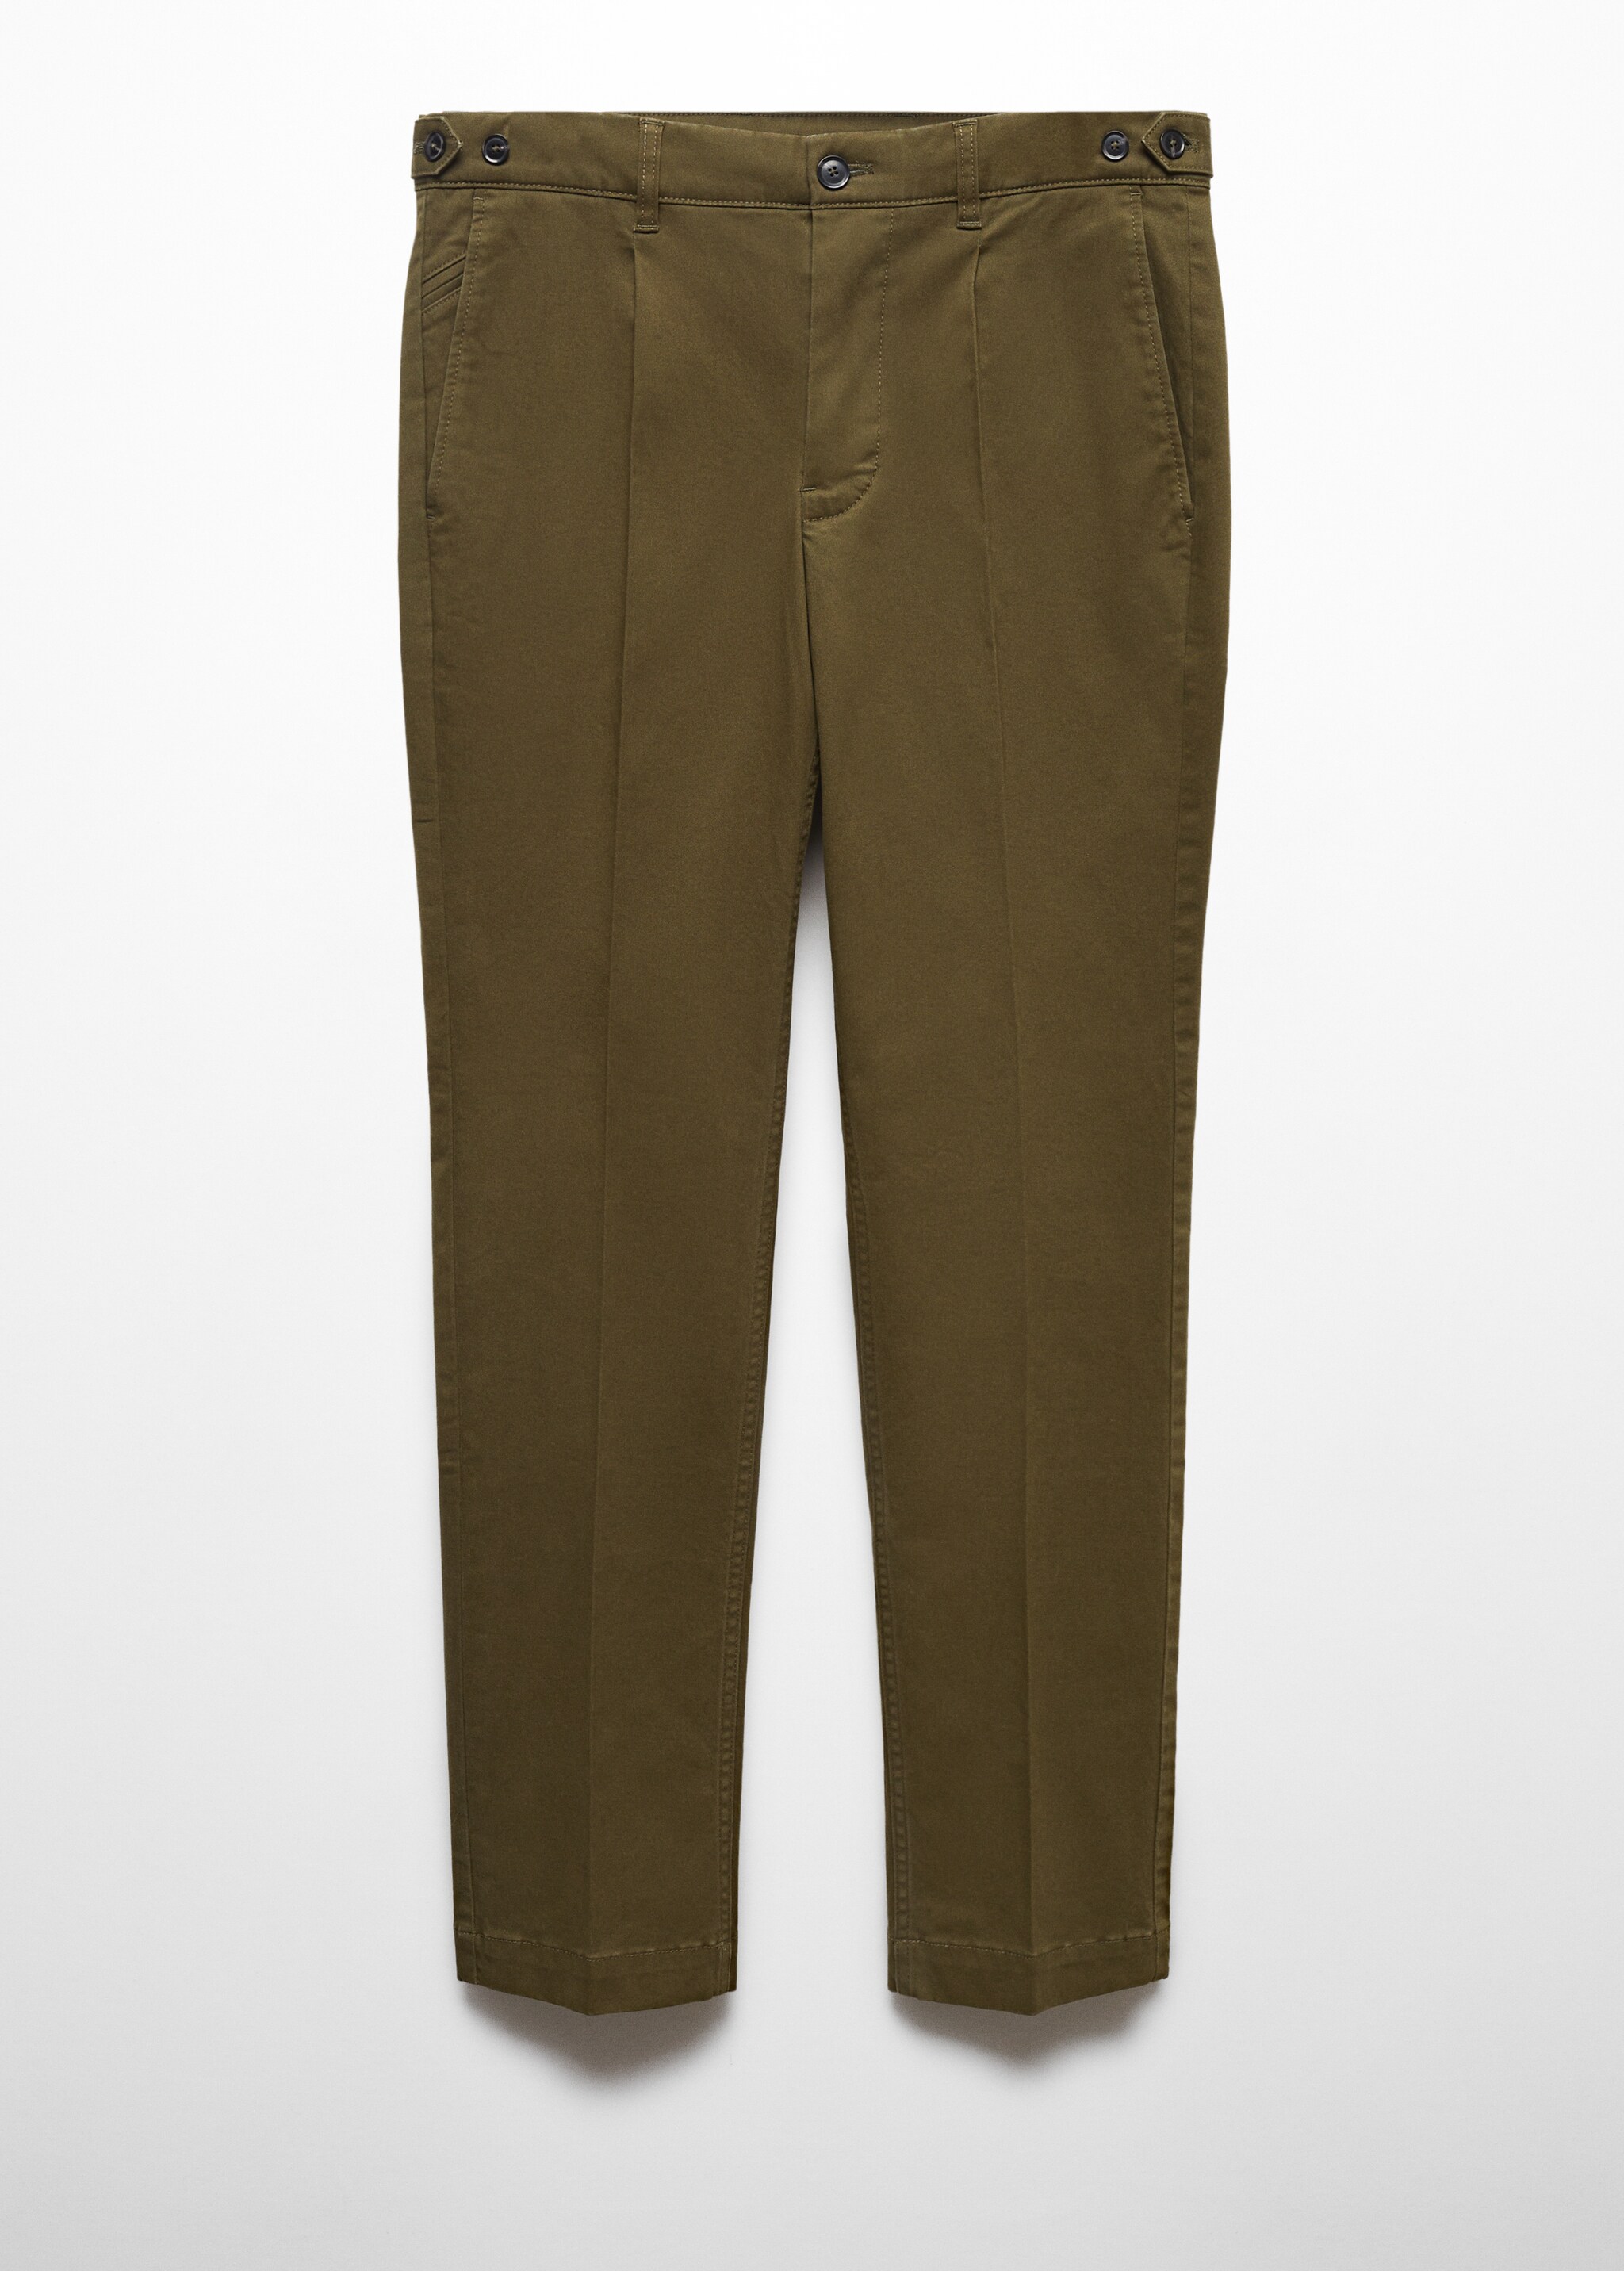 Pleated slim fit chinos - Article without model